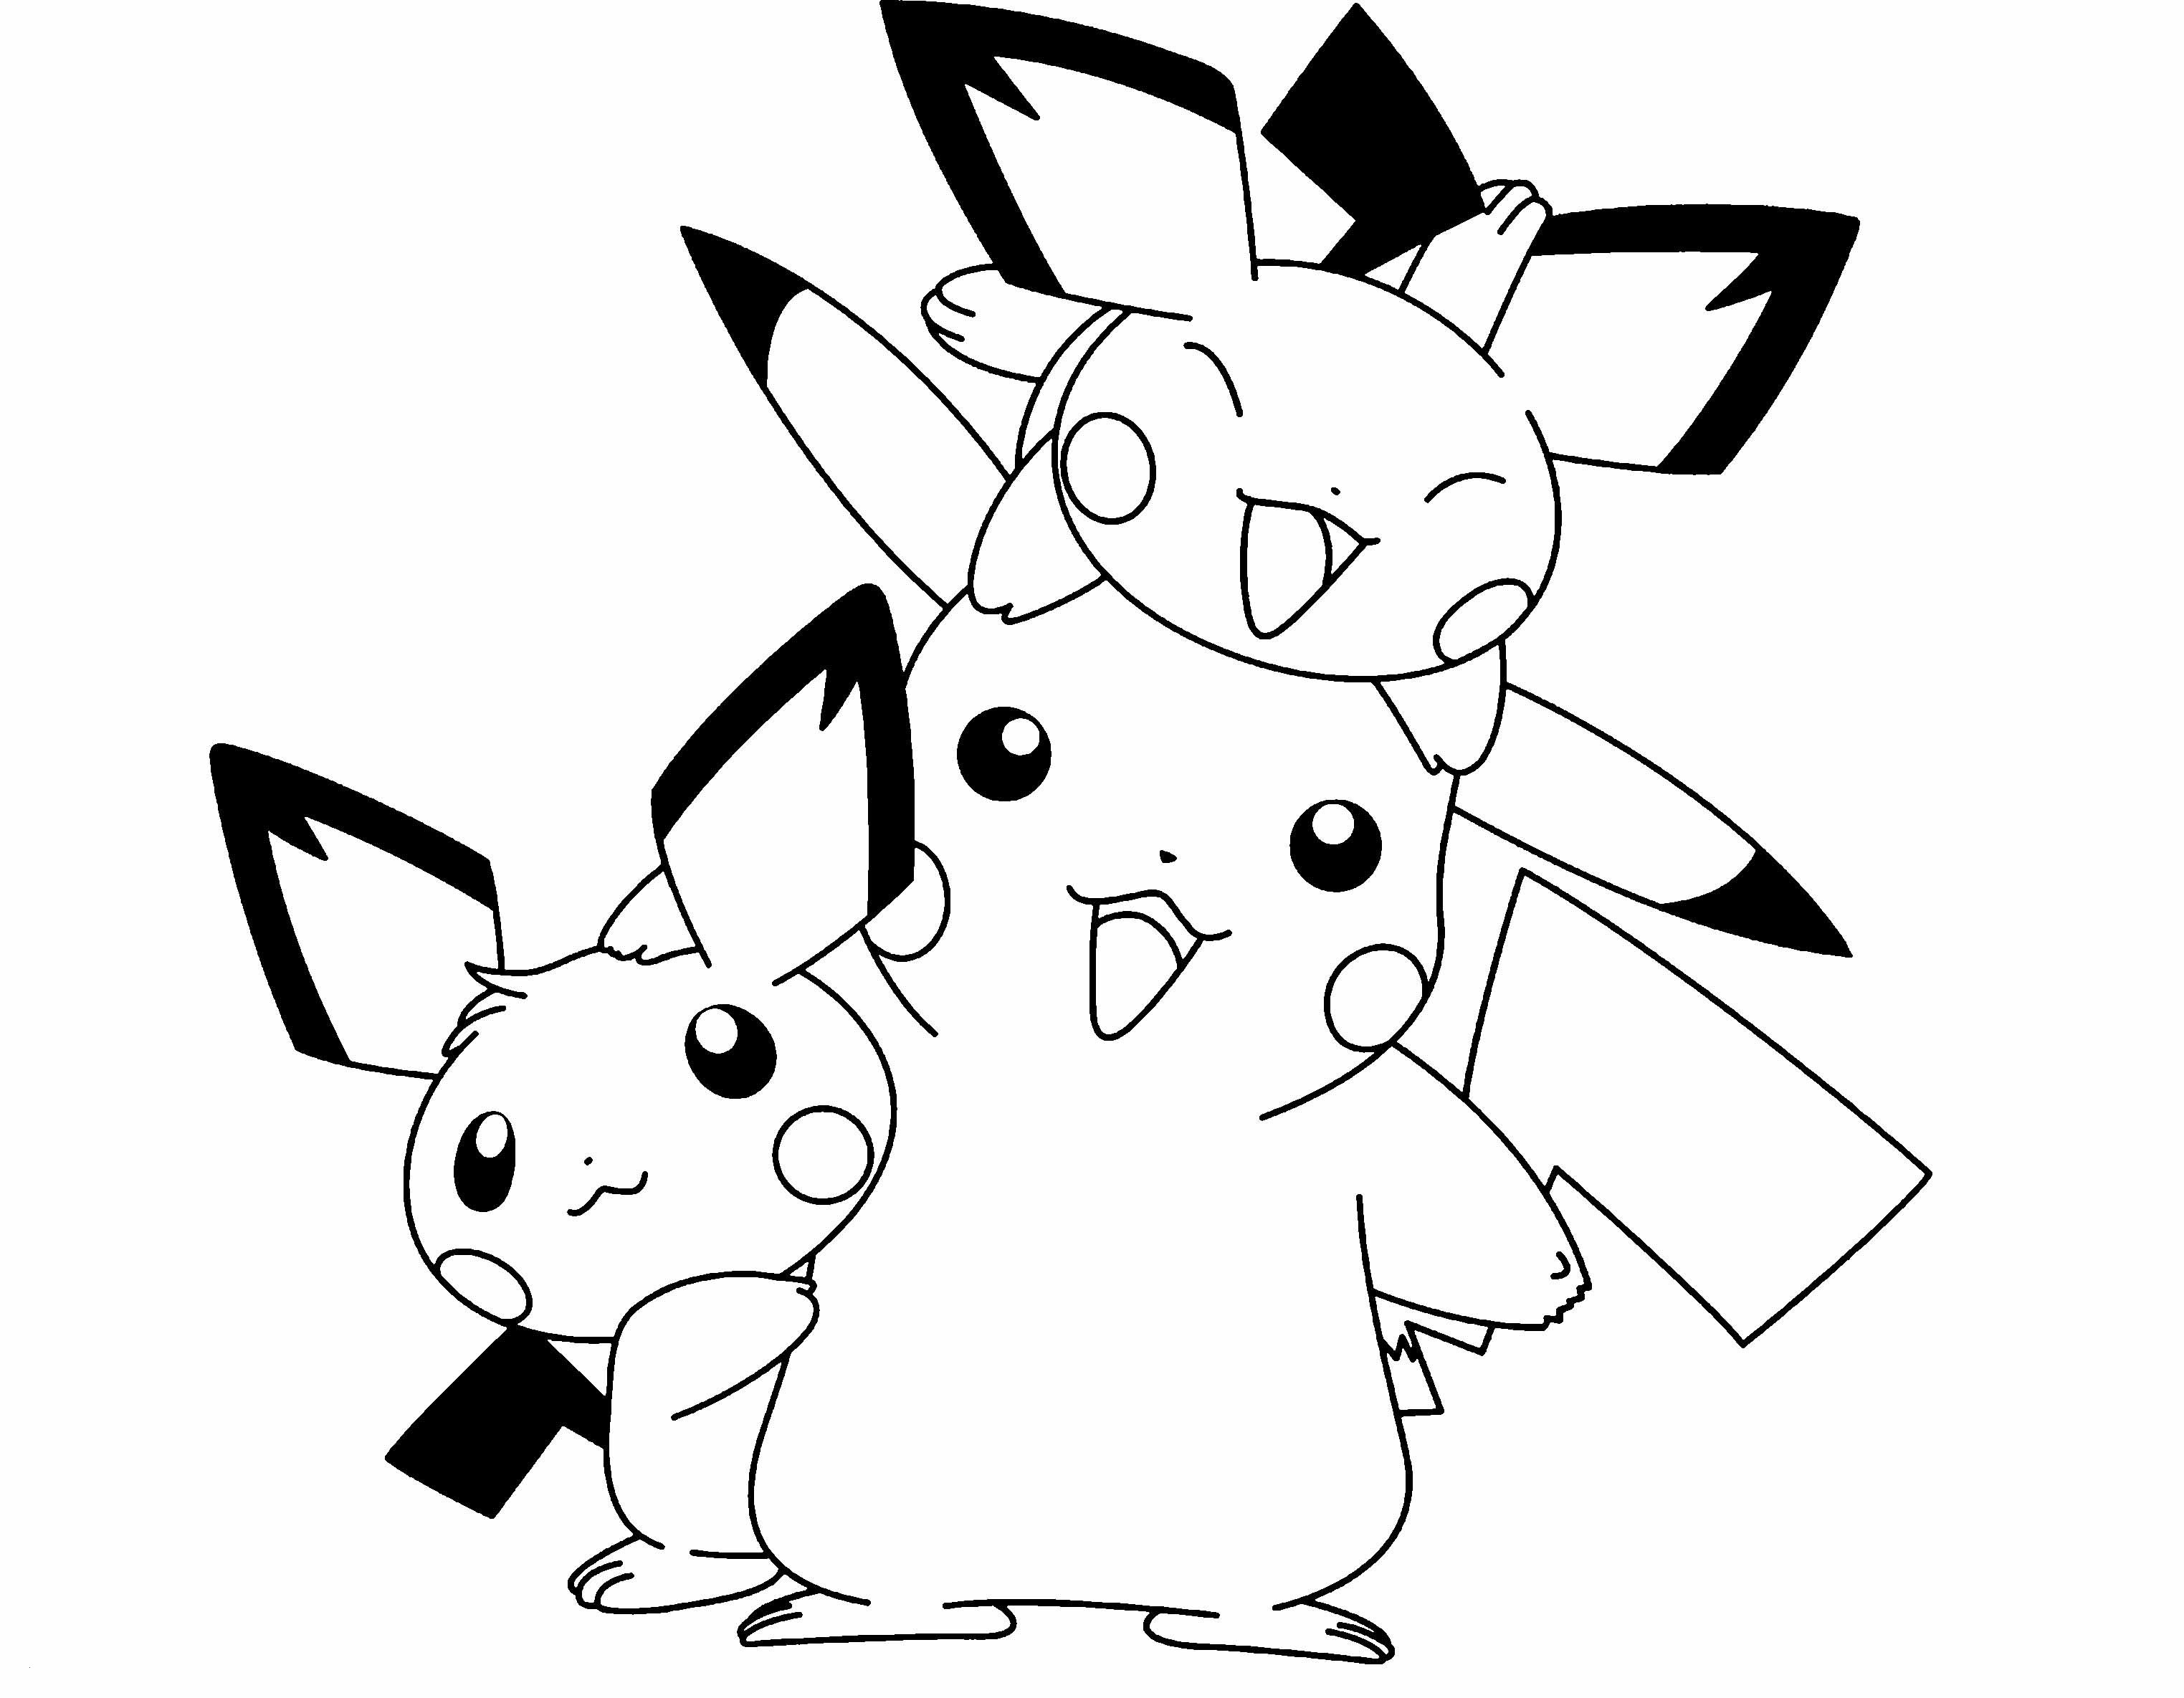 Pikachu Coloring Pages Luxury 20 Fresh Pikachu Coloring Pages